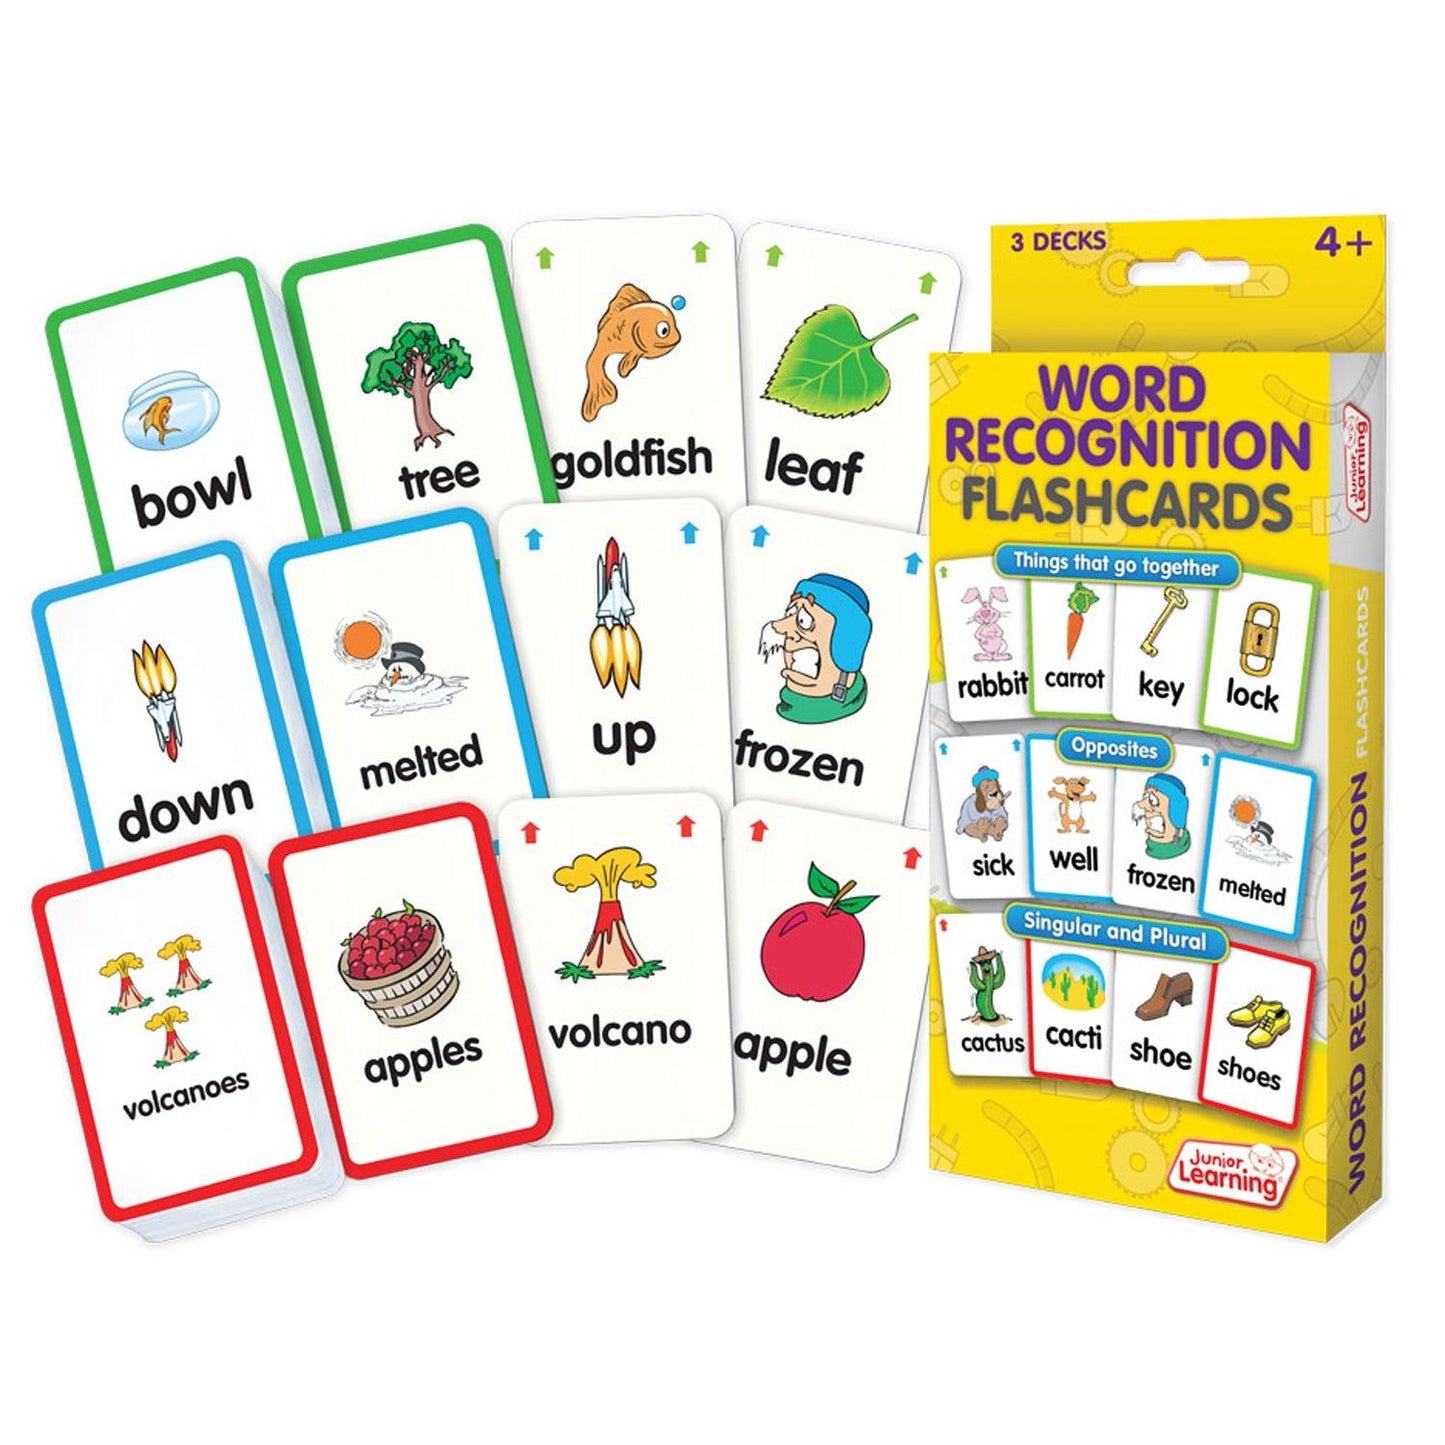 Word Recognition Flashcards, 3 Sets Per Pack, 3 Packs - Loomini